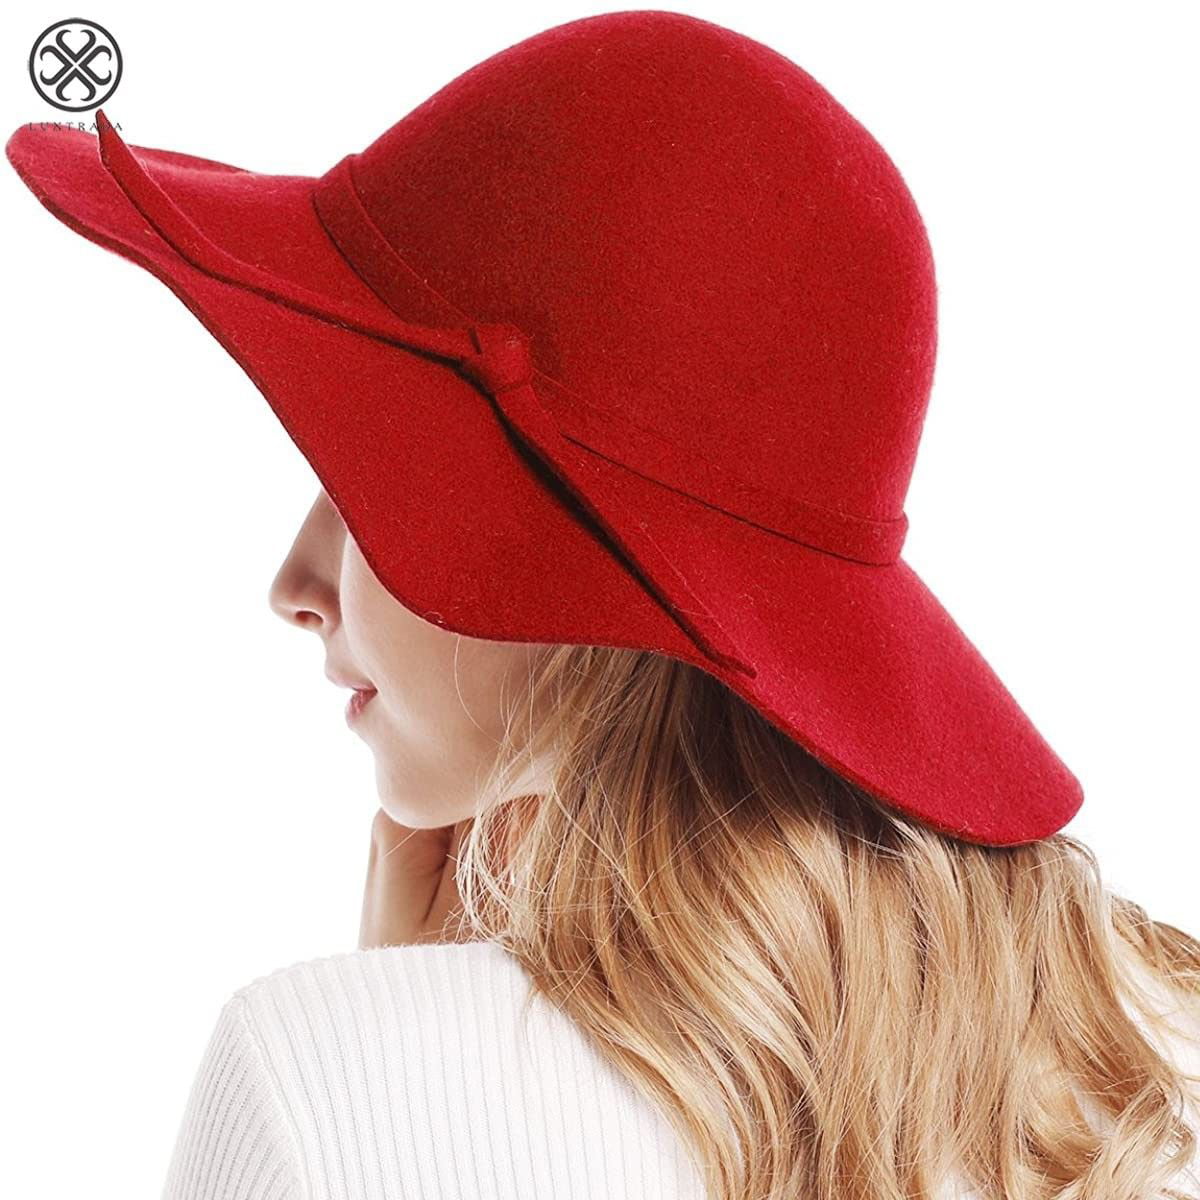 Refined Glamour: Women's Wide Brim Wool Floppy Hat for Classic Style and  Warmth,wide Brim Wool Floppy Hat 